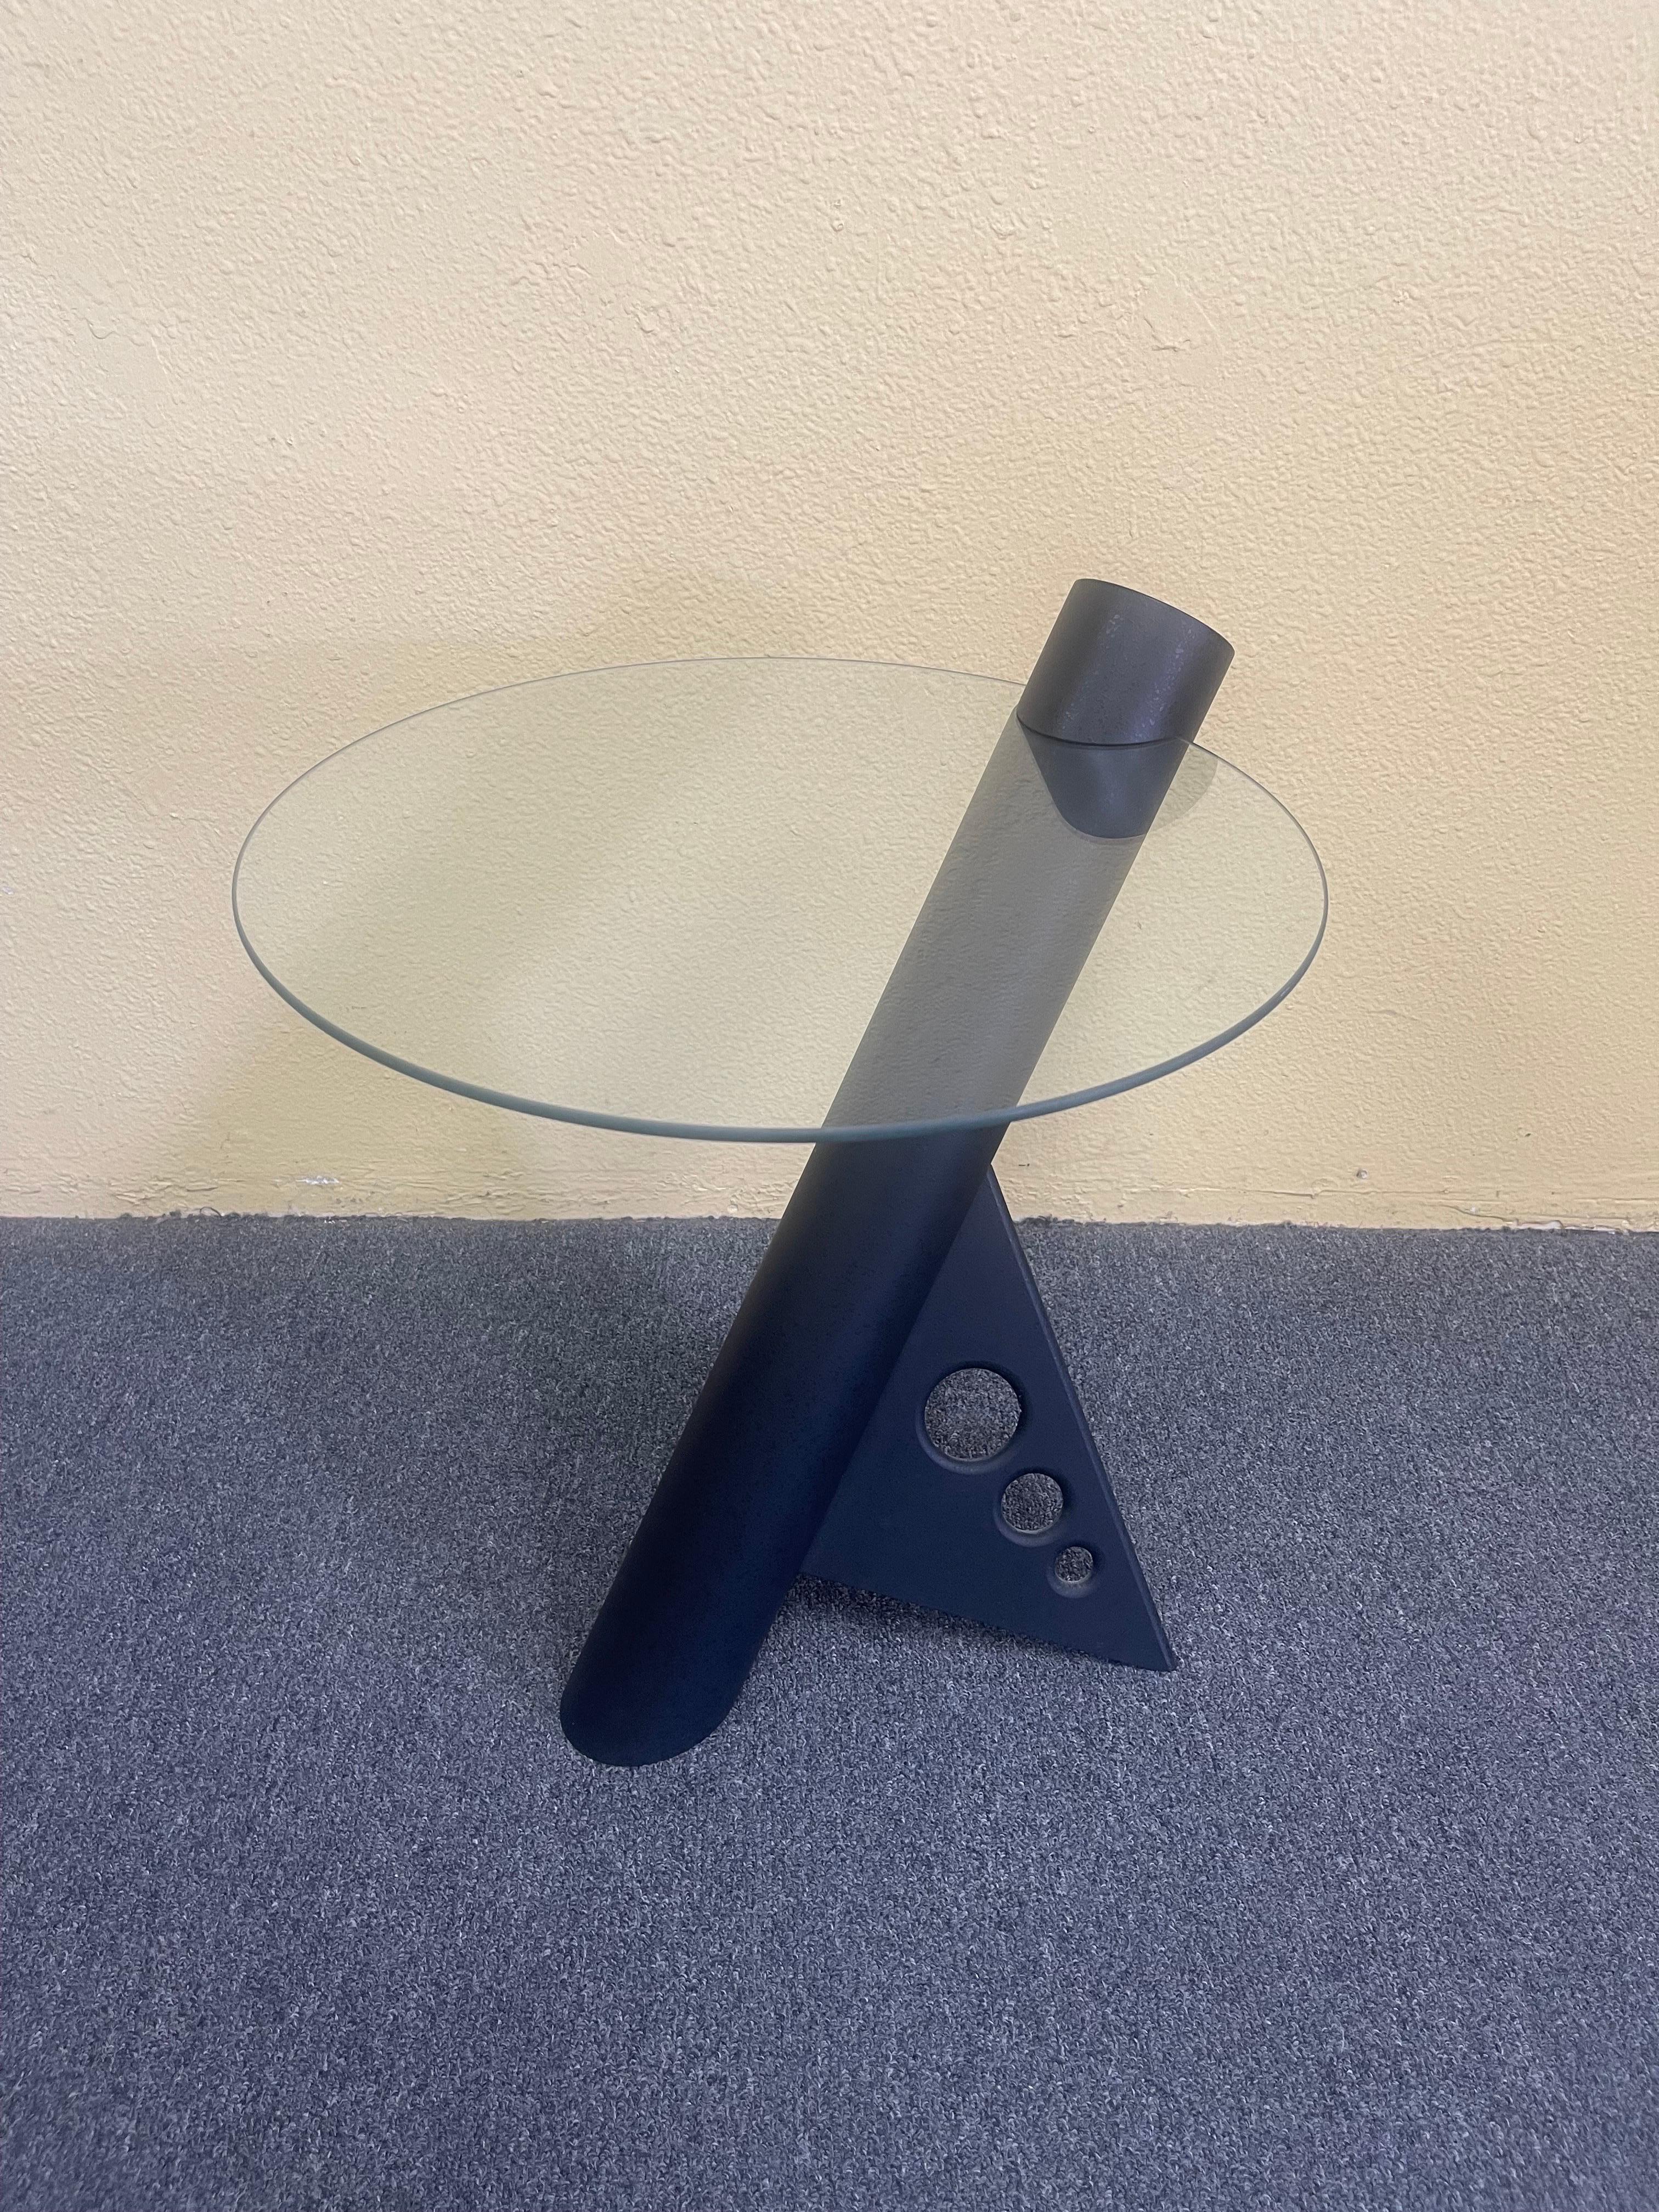 Post-Modern cantilevered glass top side table by K. Dahll, circa 1980s. The table is in very good vintage condition and measures 20.5